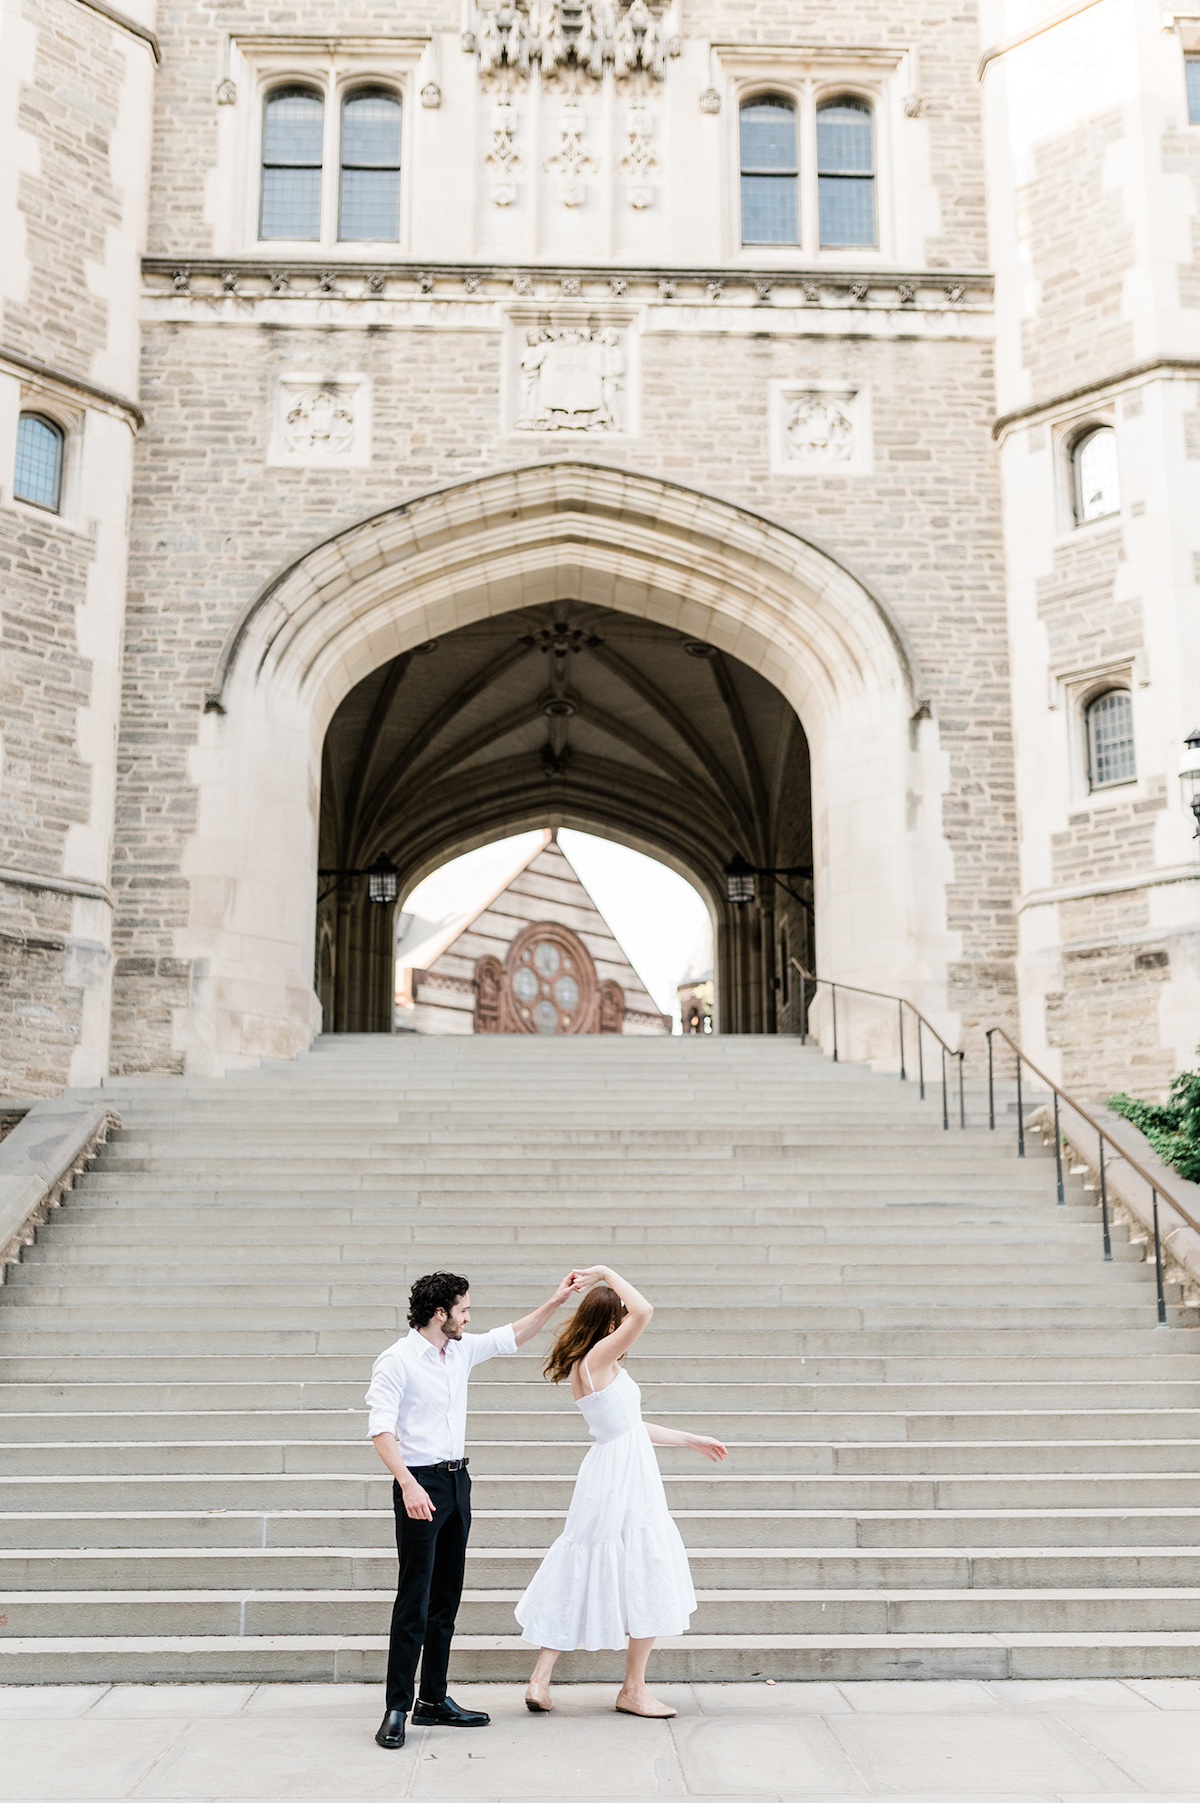 Engagement photoshoot at Princeton University: Page and Christopher sharing a tender moment under the iconic archway.